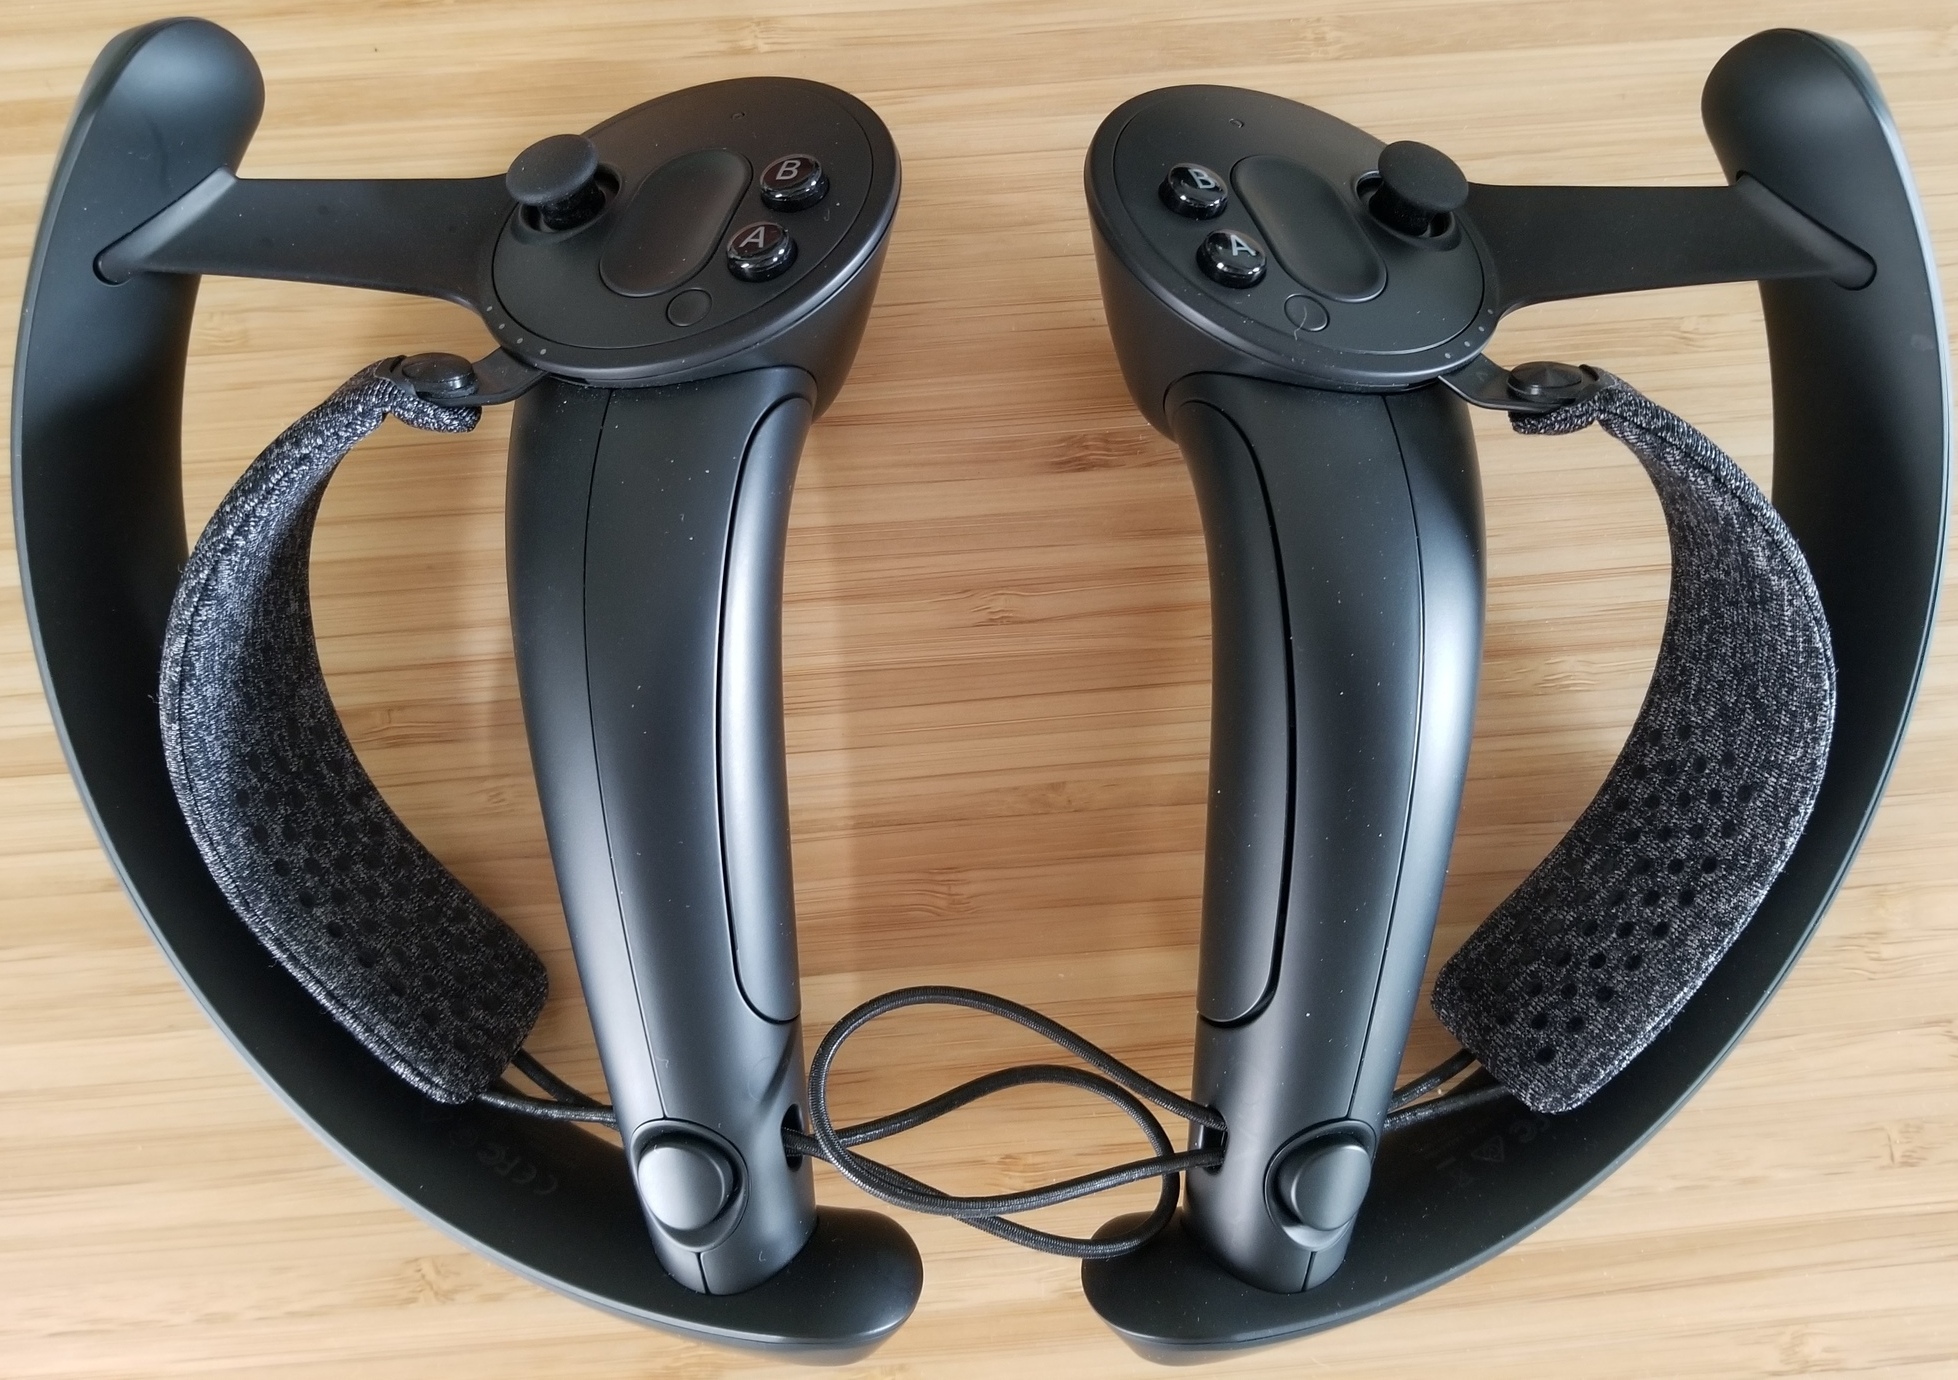 The knuckles controllers. The adjustable strap to keep it attached to your hand seems obvious, but makes it intuitive to use.